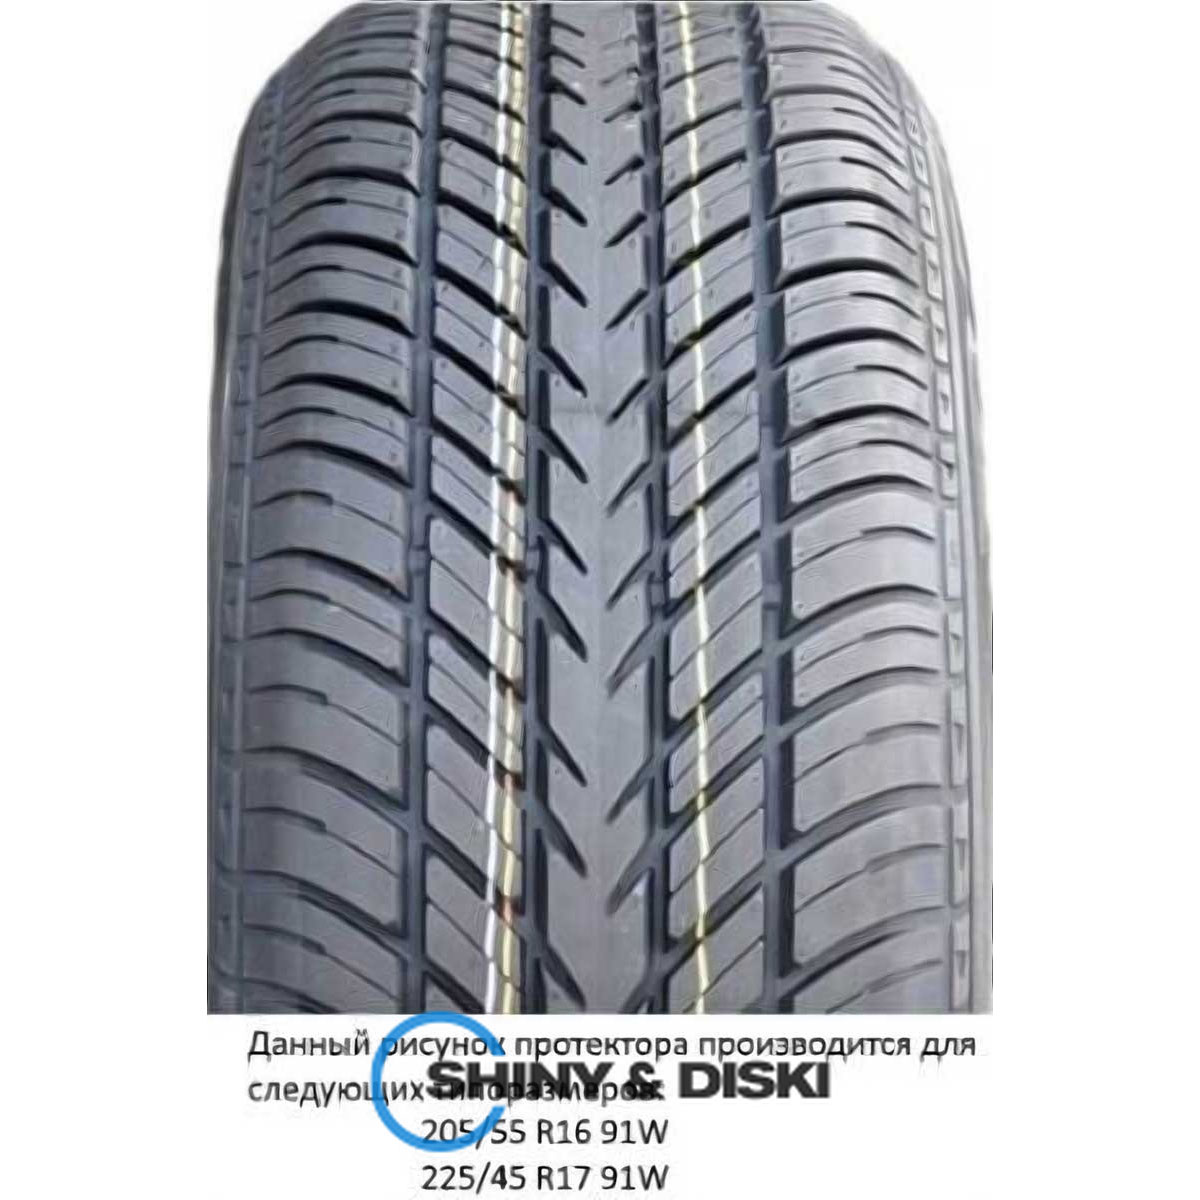 покришки kelly uhp 225/45 r17 91w fp